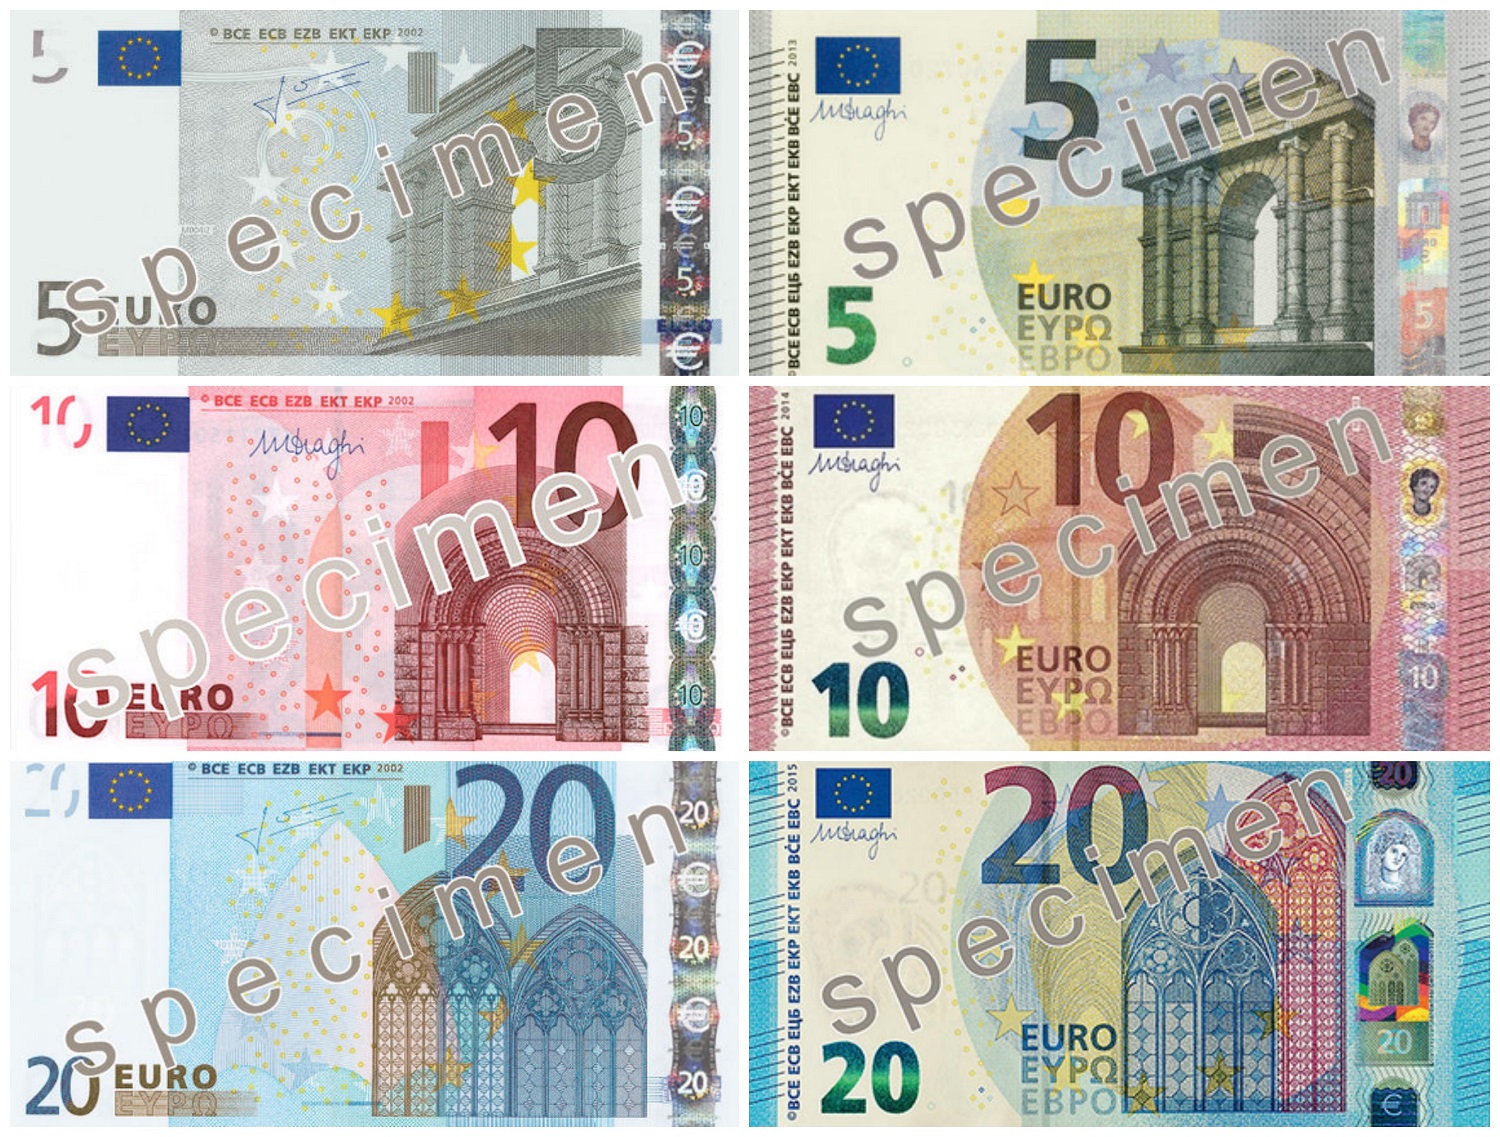 Our Guide to New Euro Notes | Big Red Cloud